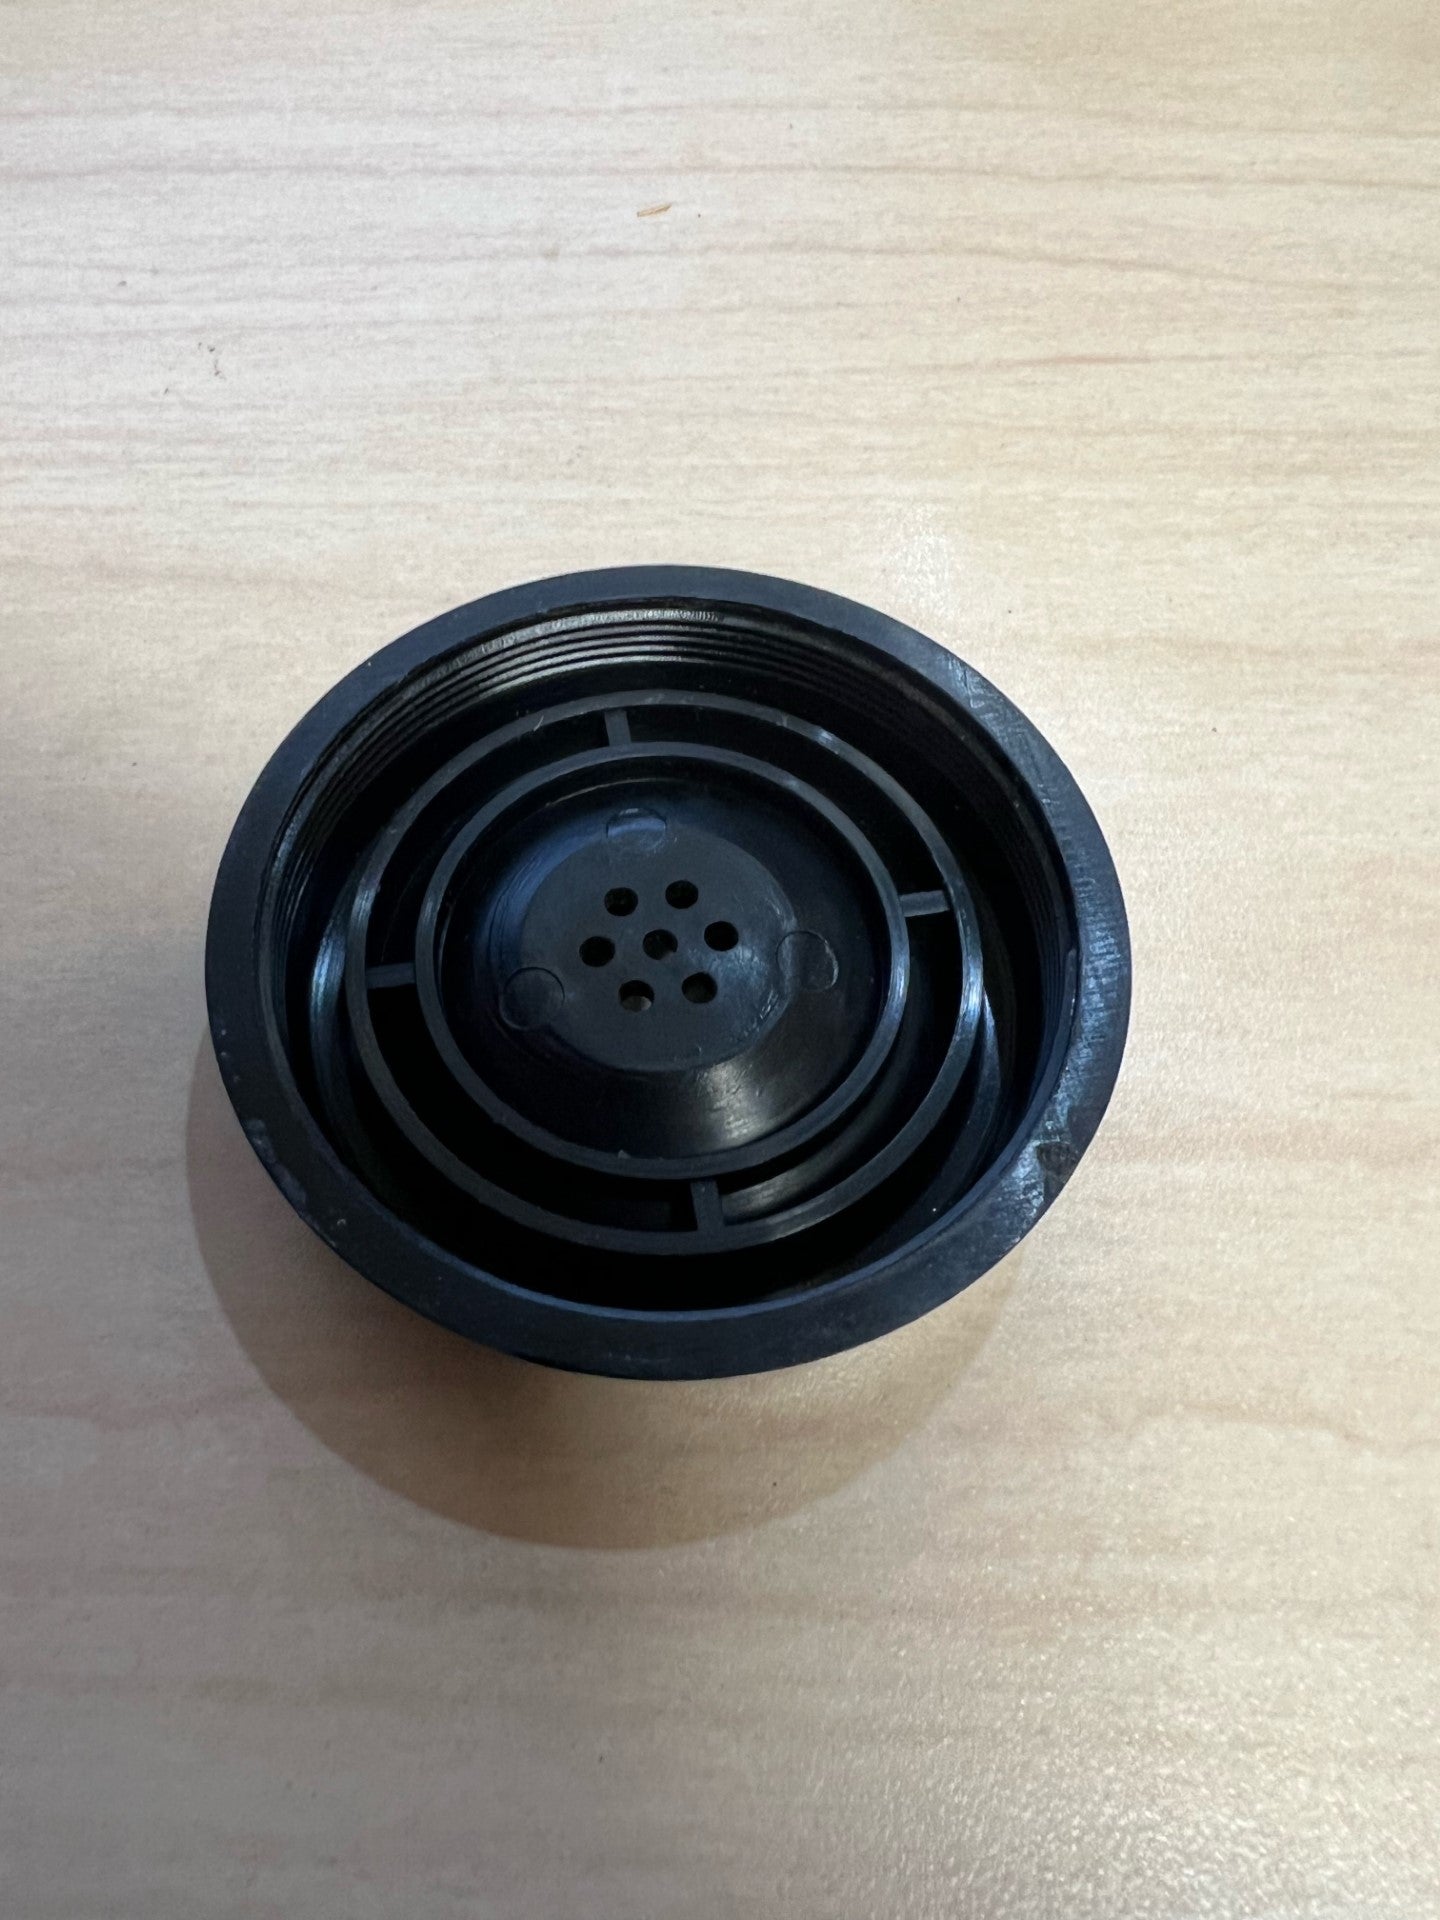 Receiver Cap for ATC Novelty Candlestick Telephone